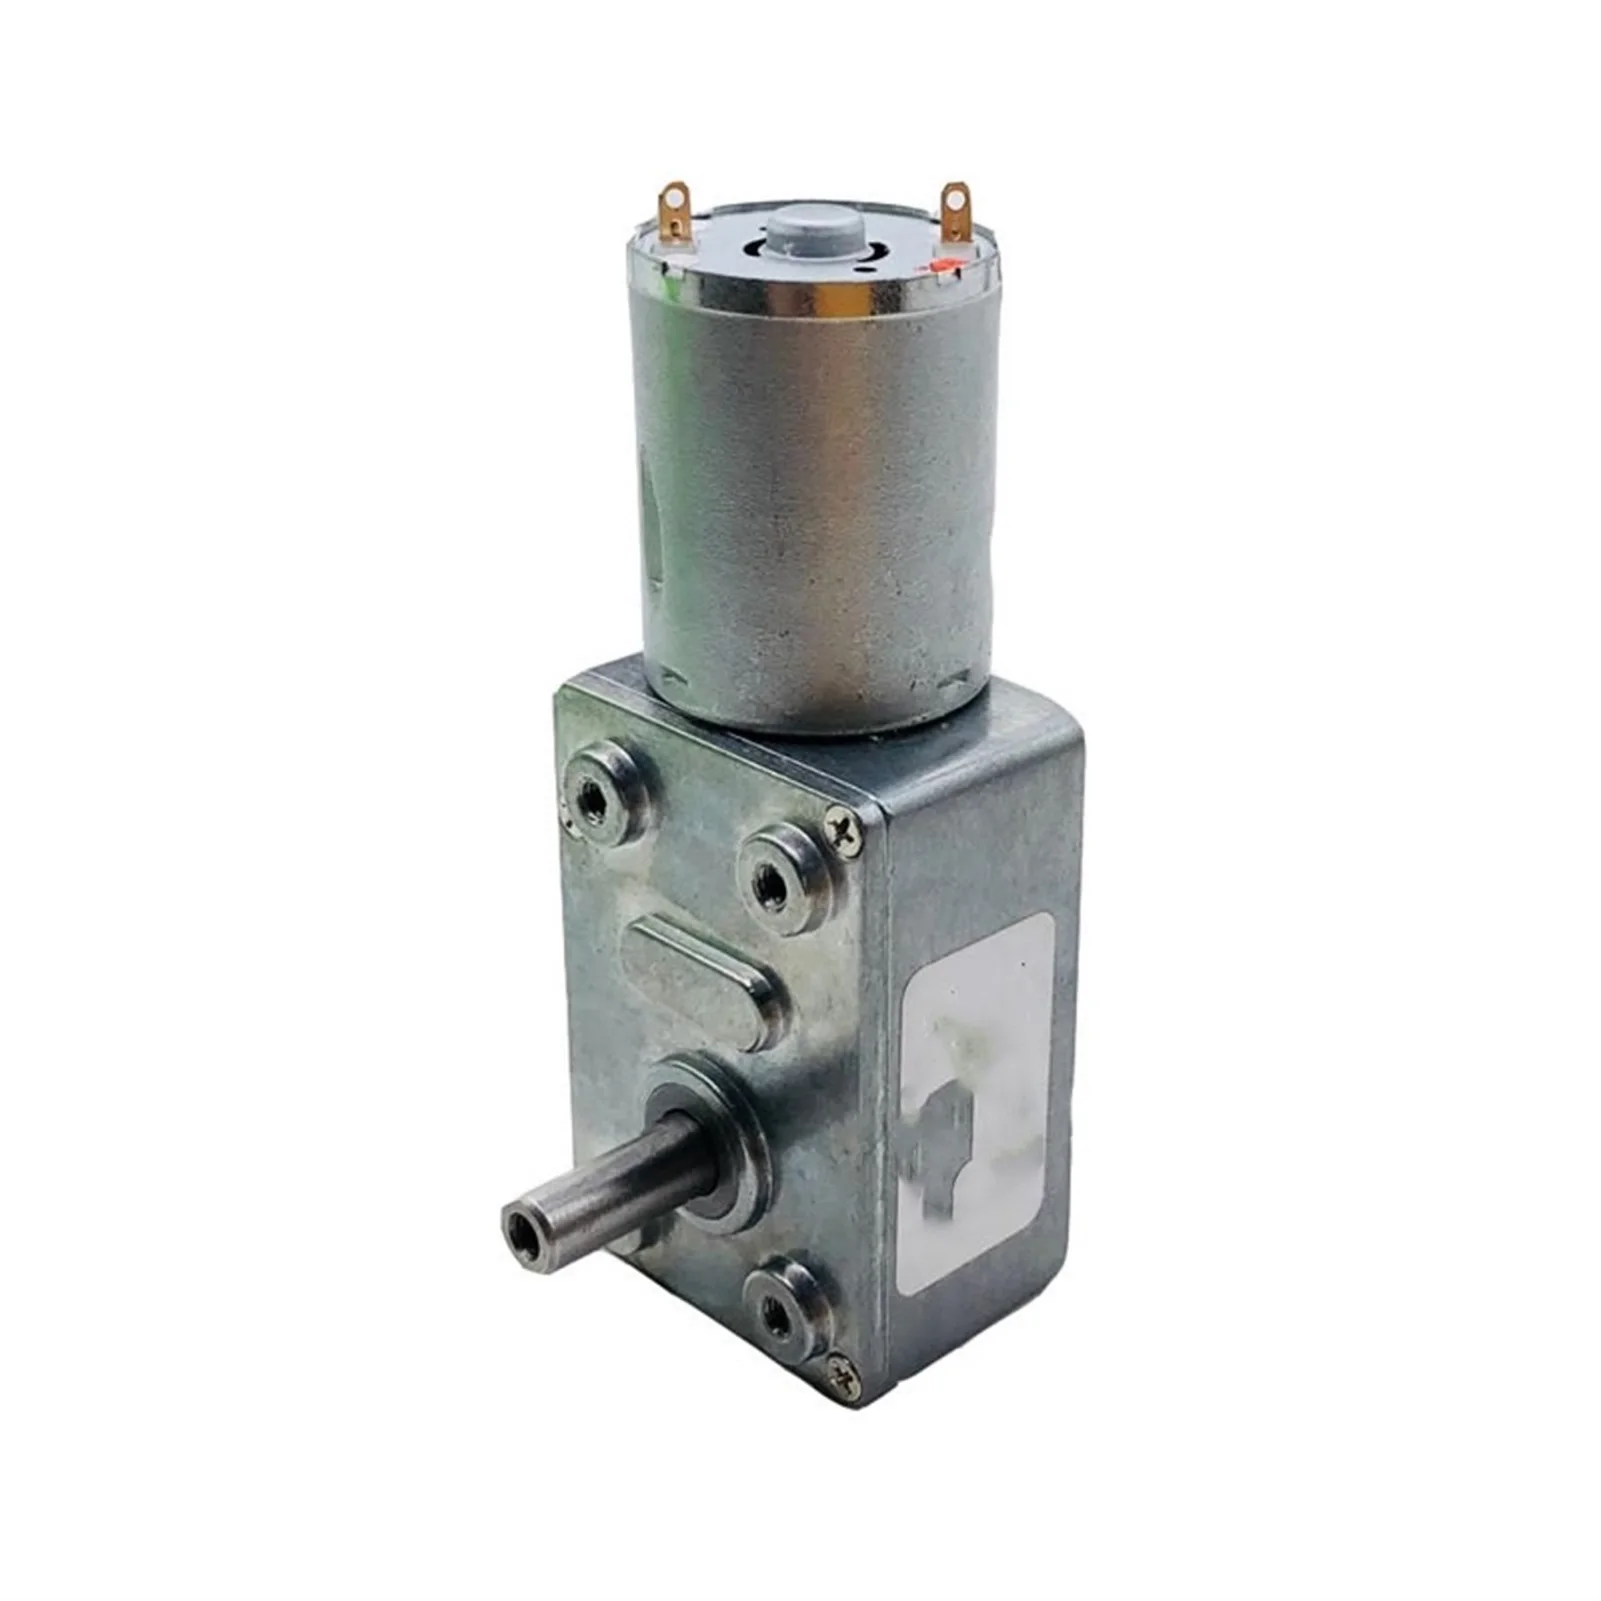 

Slow Rotating Dc Geared Motor, JGY370 Small Motors, for Projects Gearbox 6v Dc Mega Geared High Torque 6v Motor, self‑locking